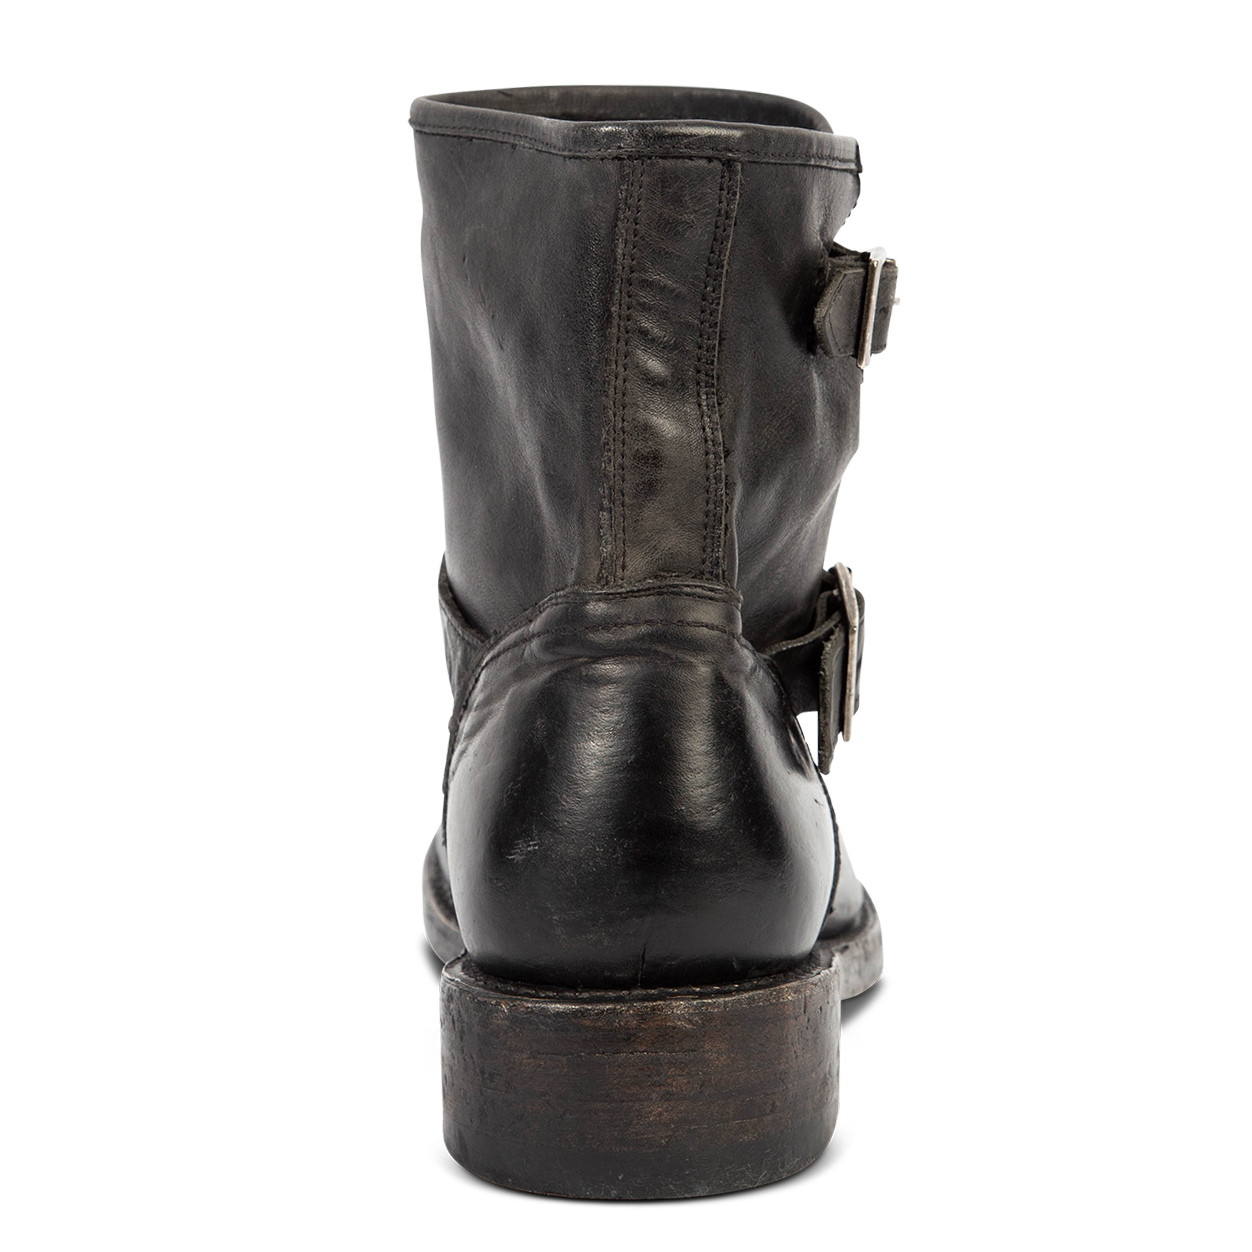 Back view showing stacked leather heel on FREEBIRD men's Charles black leather boot